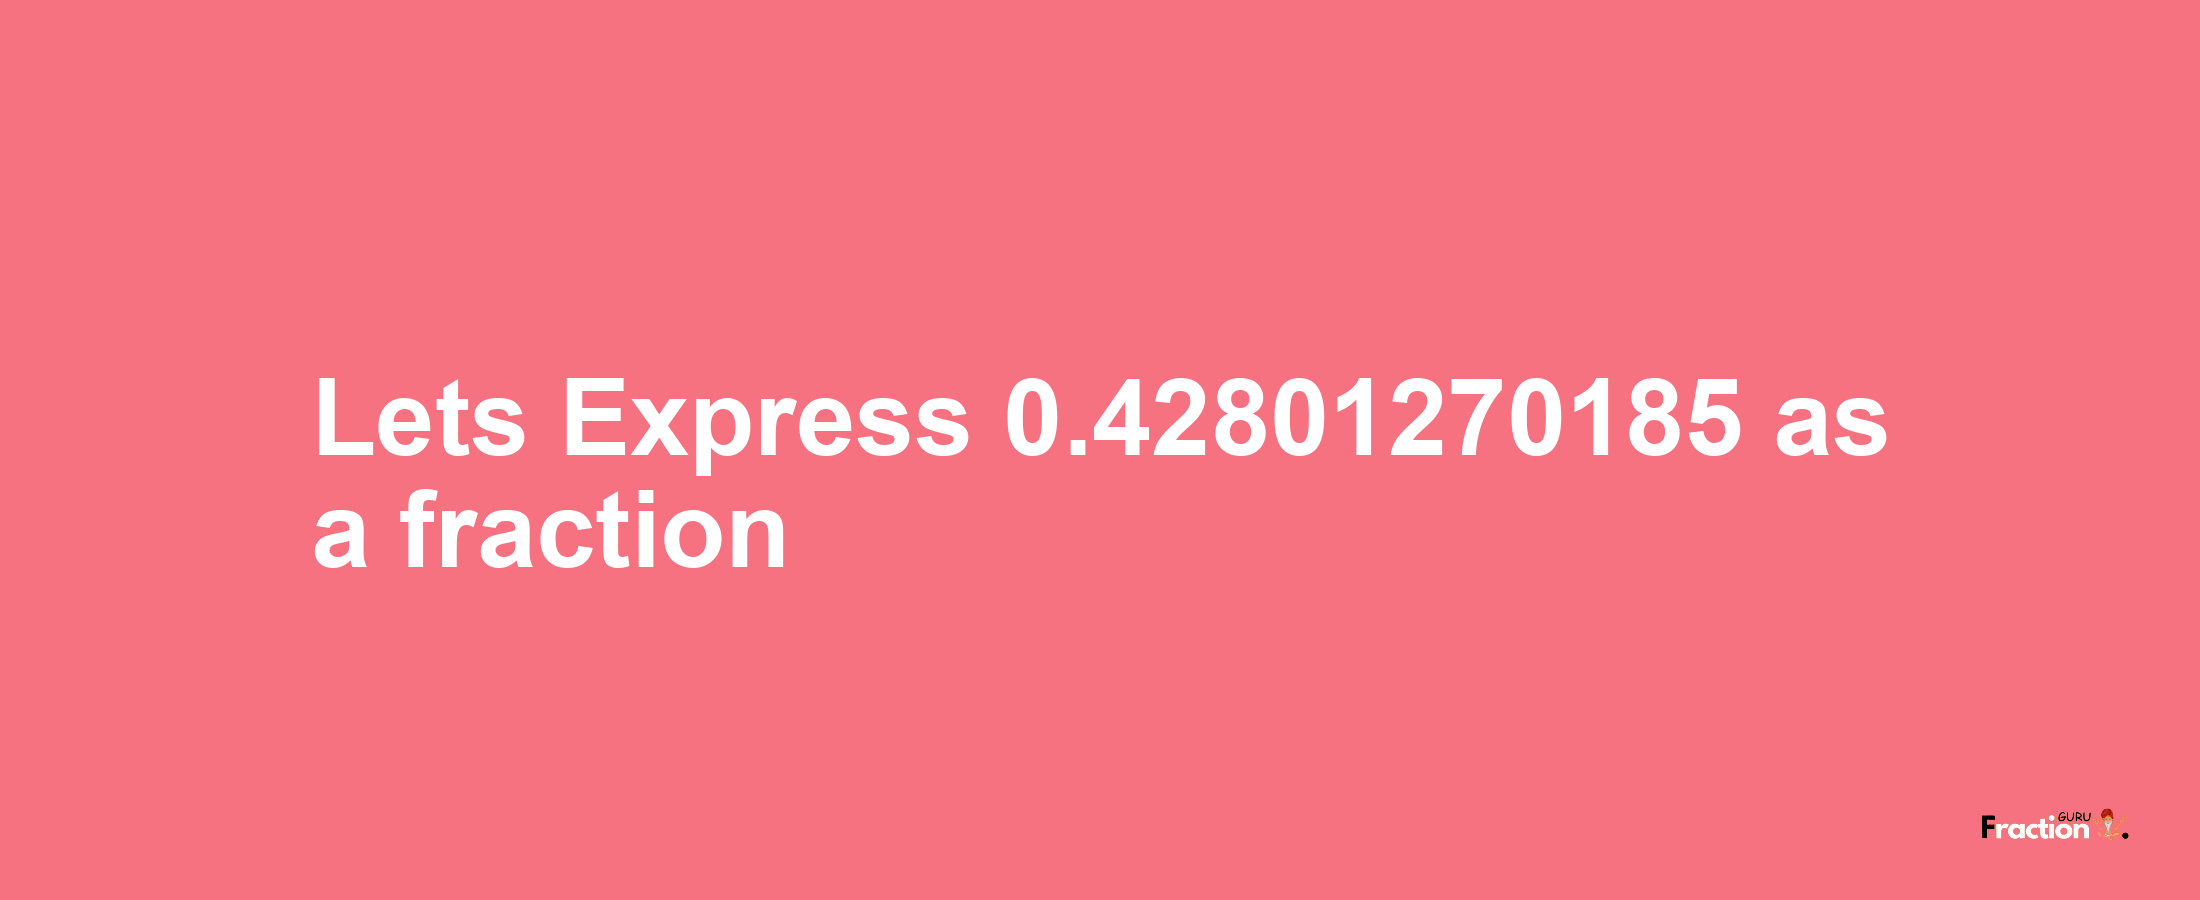 Lets Express 0.42801270185 as afraction